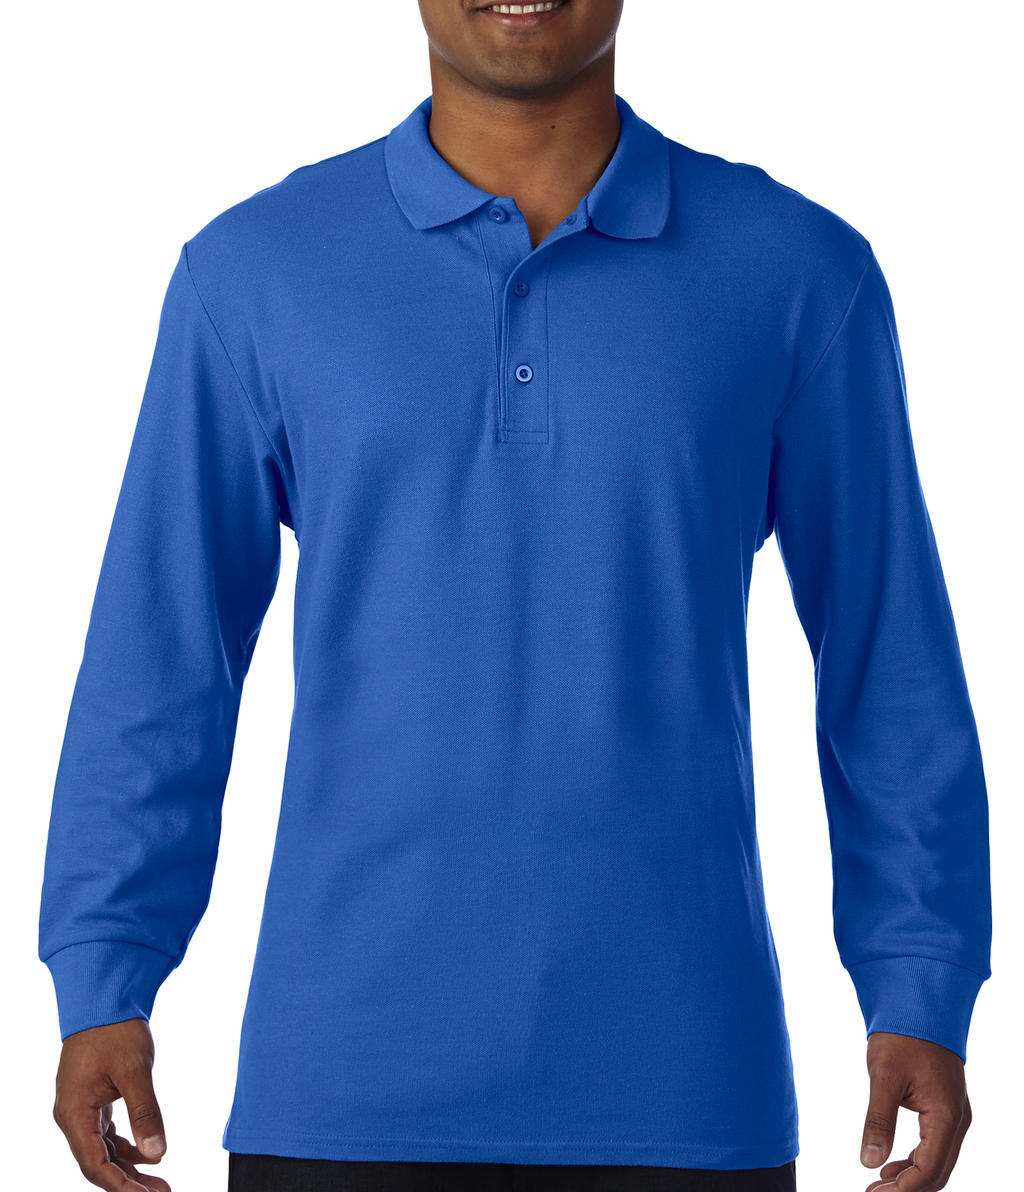  Premium Cotton Adult Double Piqu? Polo LS in Farbe Royal